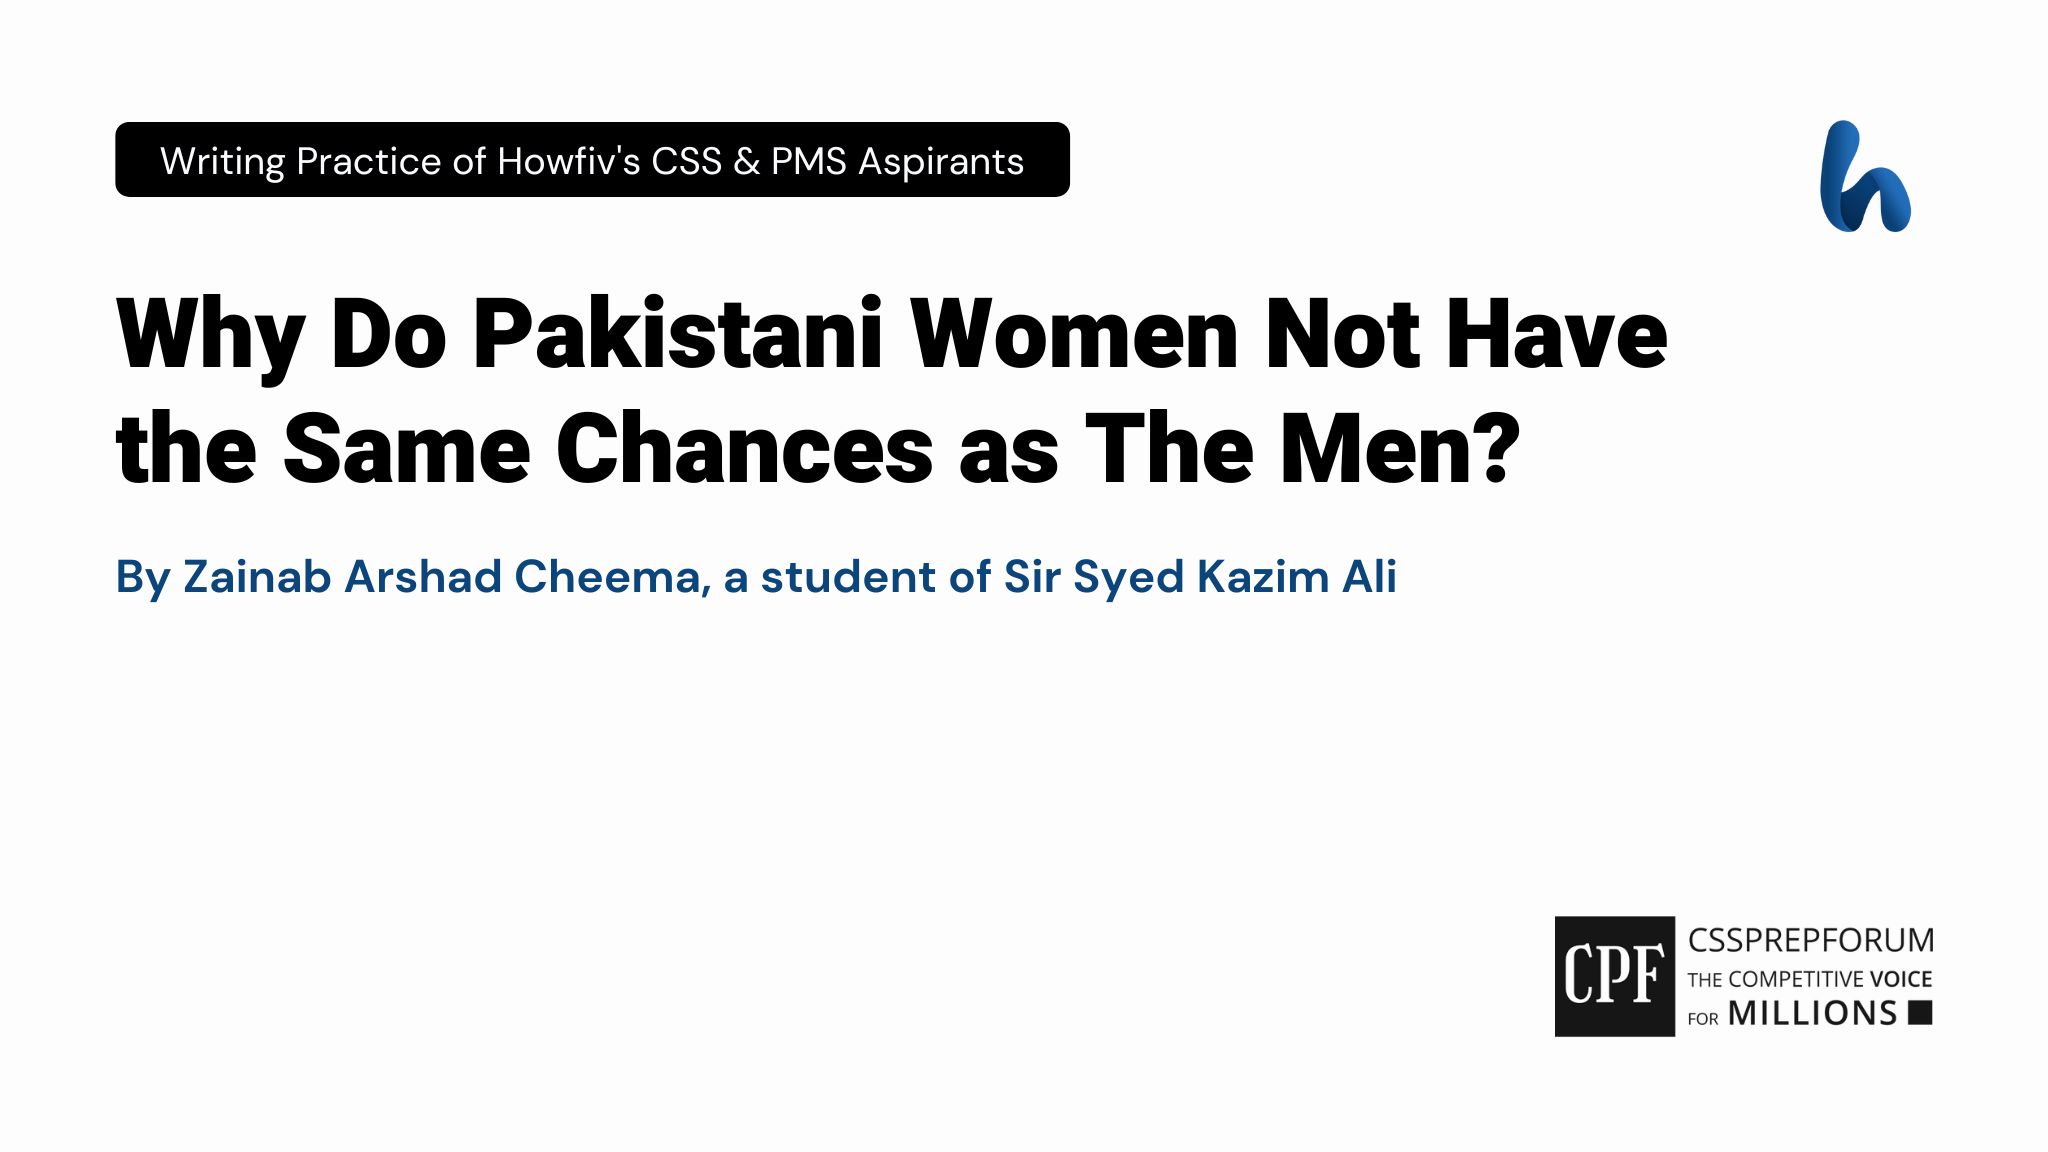 Why Do Pakistani Women Not Have the Same Chances as The Men